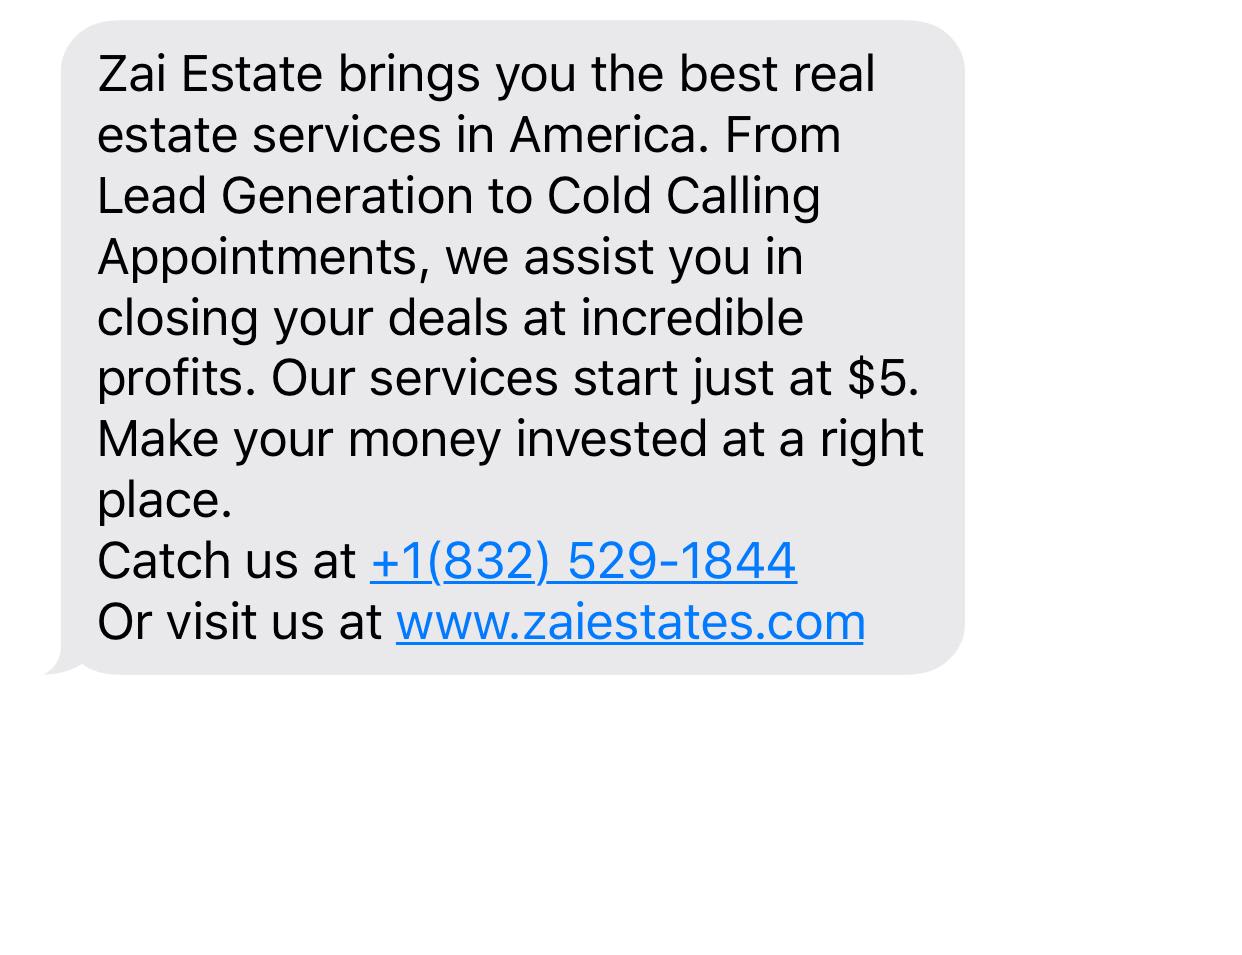 SMS Marketing for Real Estate